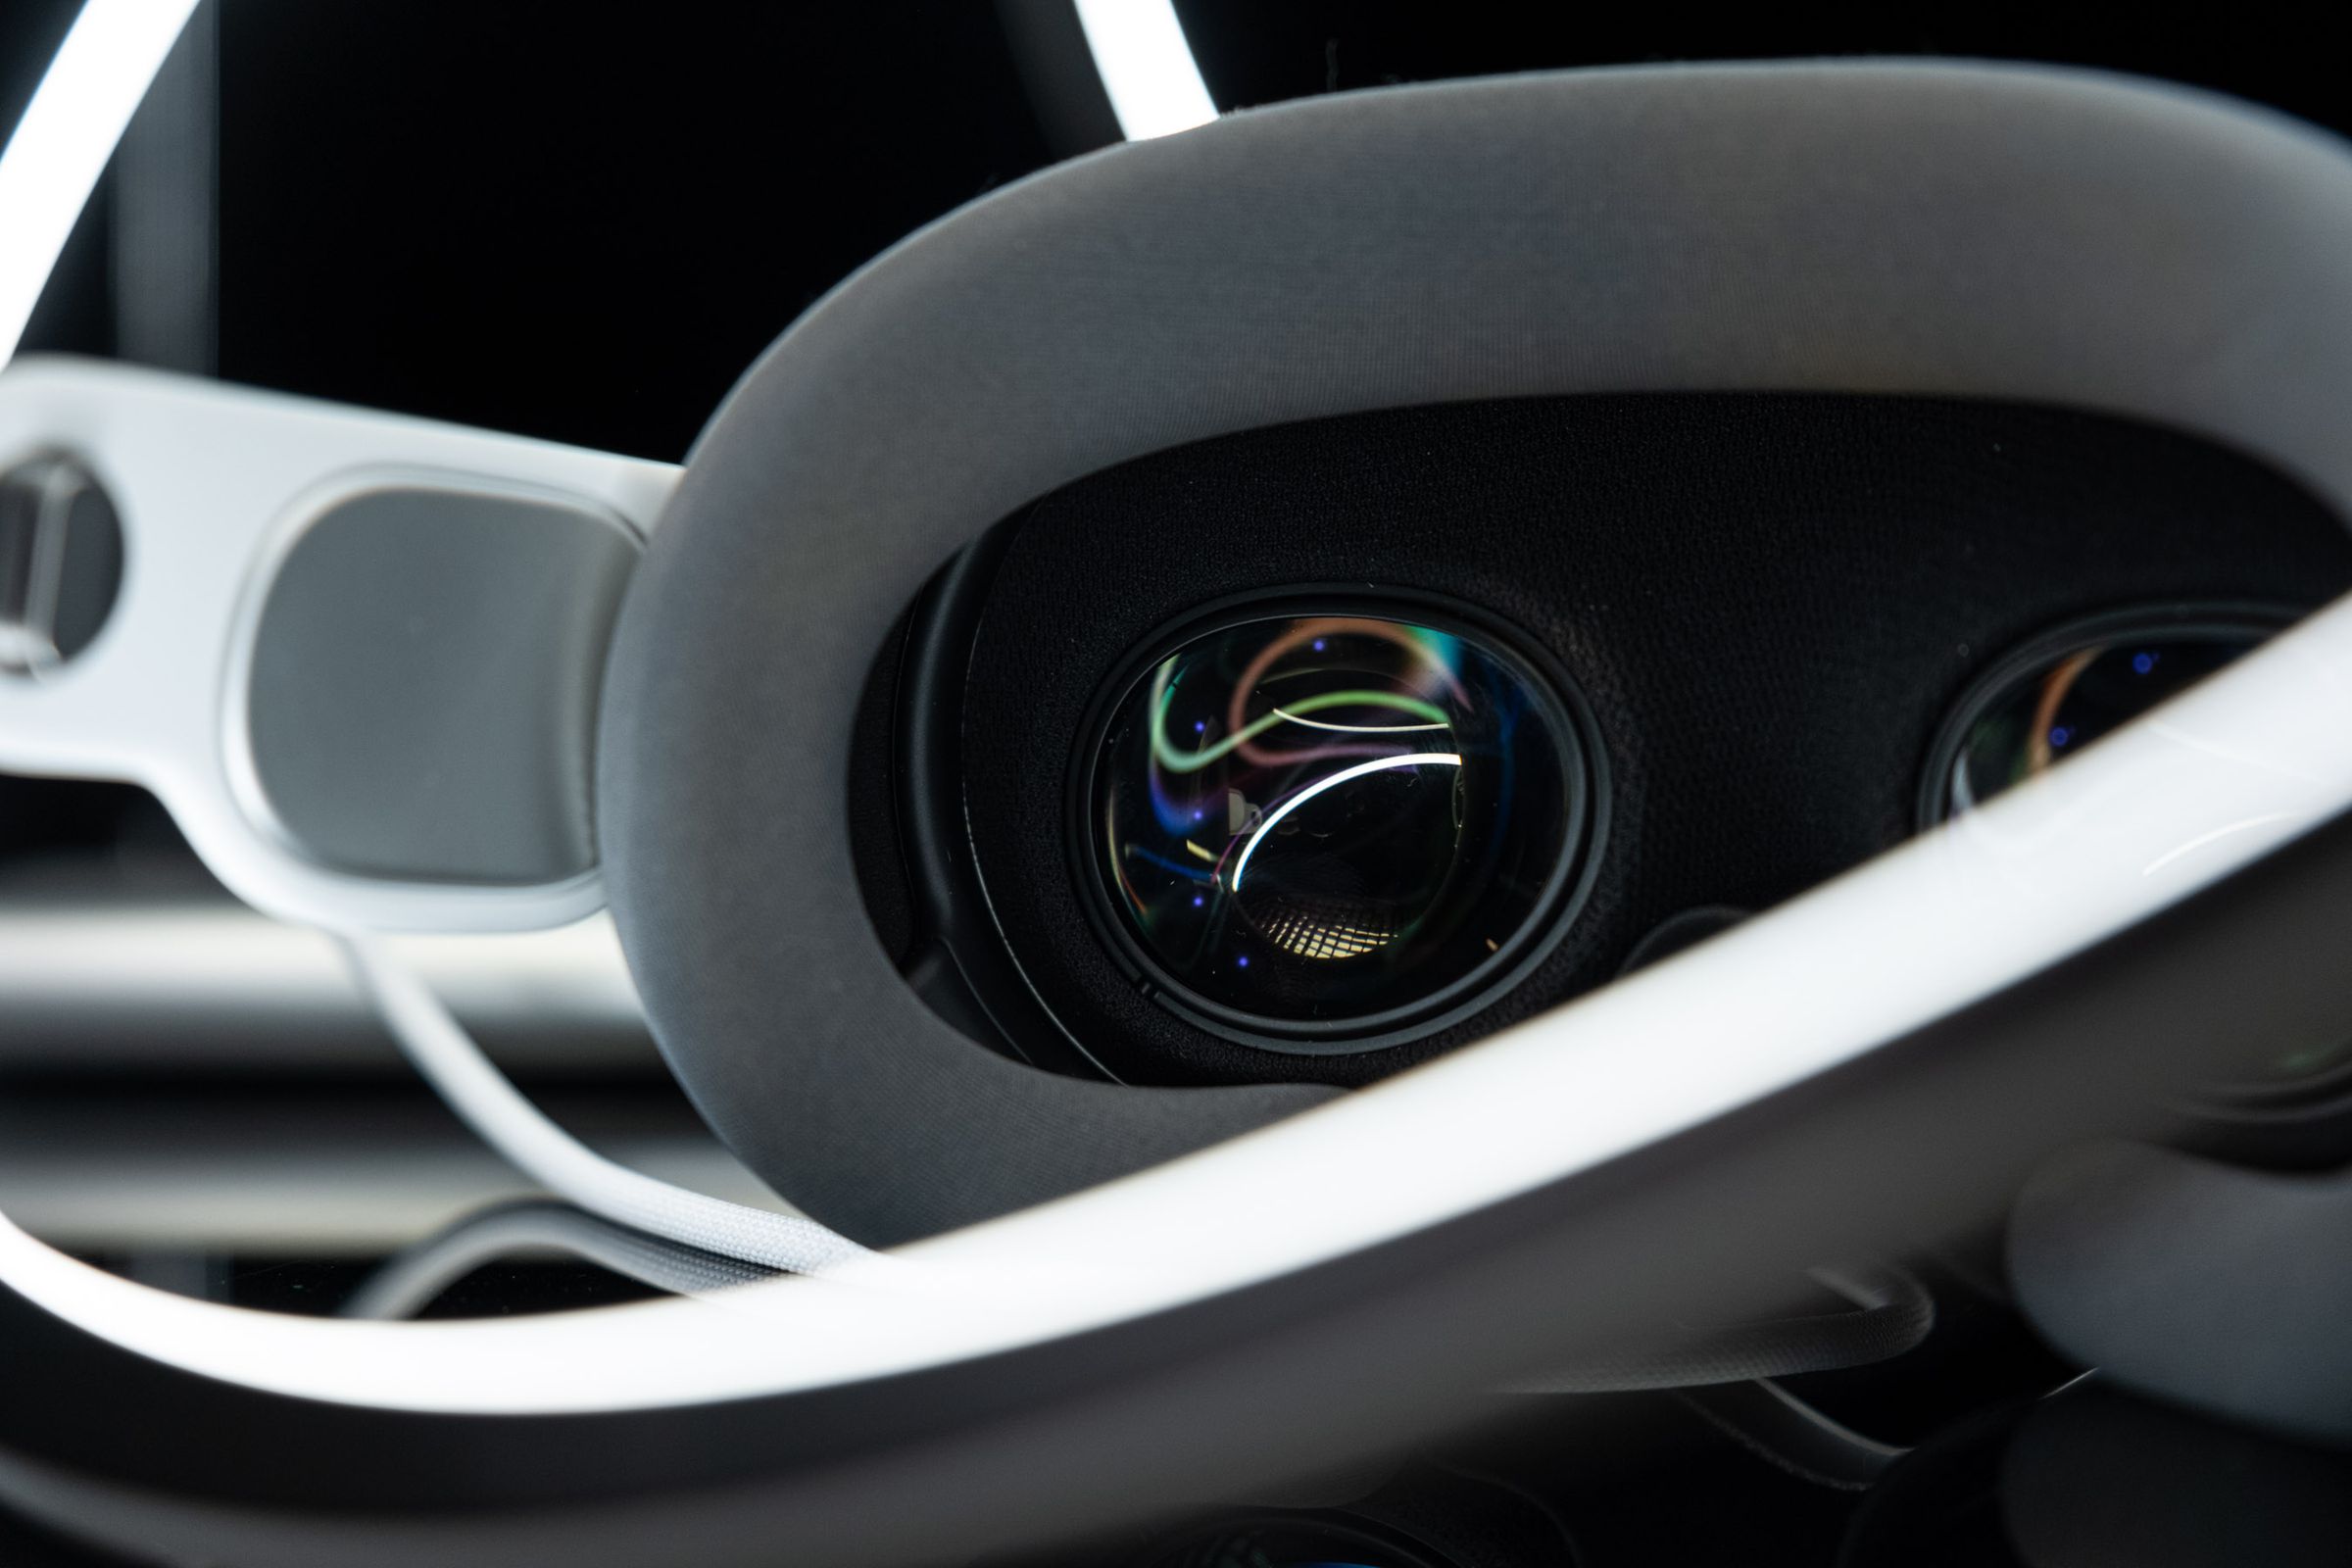 A photo of the inside of the Vision Pro, showing the lenses of the display.